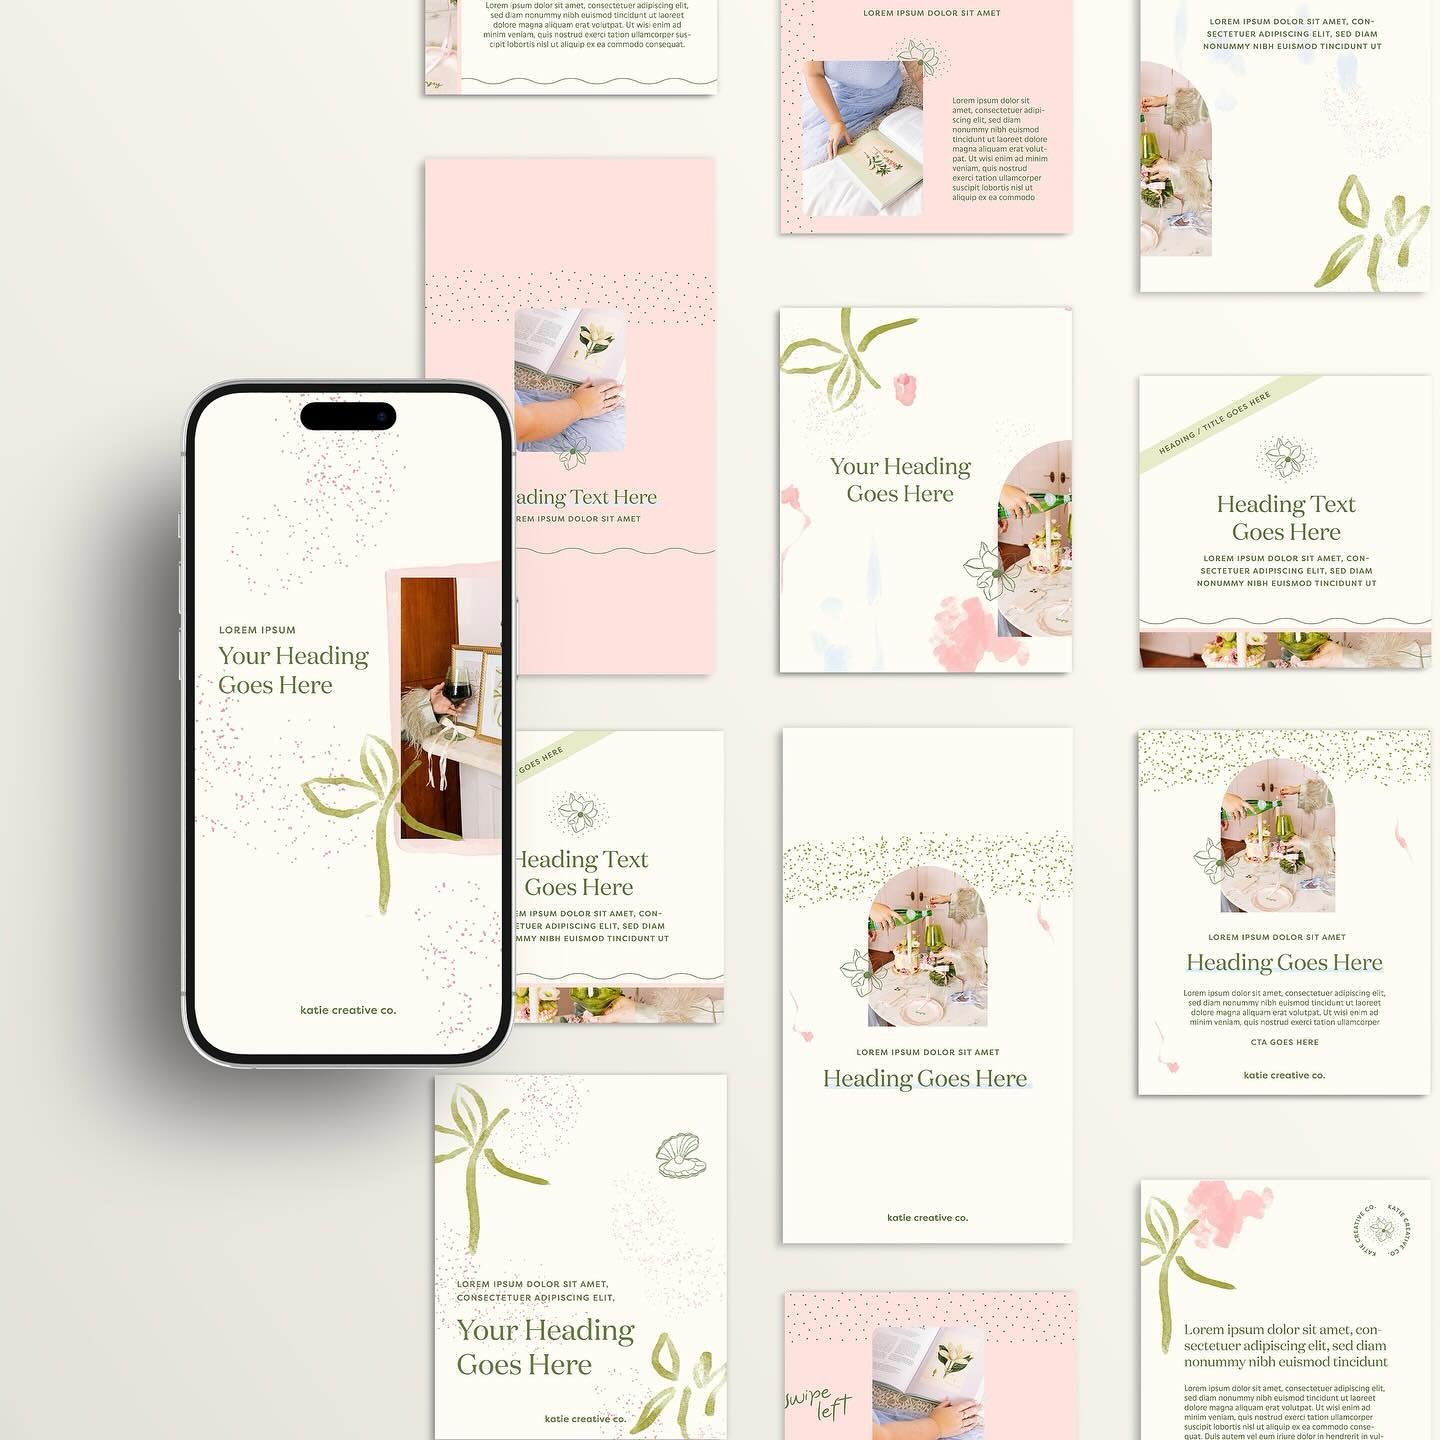 A few Social Media Graphics we&rsquo;ve designed lately ✨

🌸 Katie Creative Co. &mdash; Social Media &amp; Content Strategist
🌸 Stephanie Kase Education &mdash; Social Media &amp; Business Coach 
🌸 Revival at Home &mdash; Real Estate / Realtor 
🌸